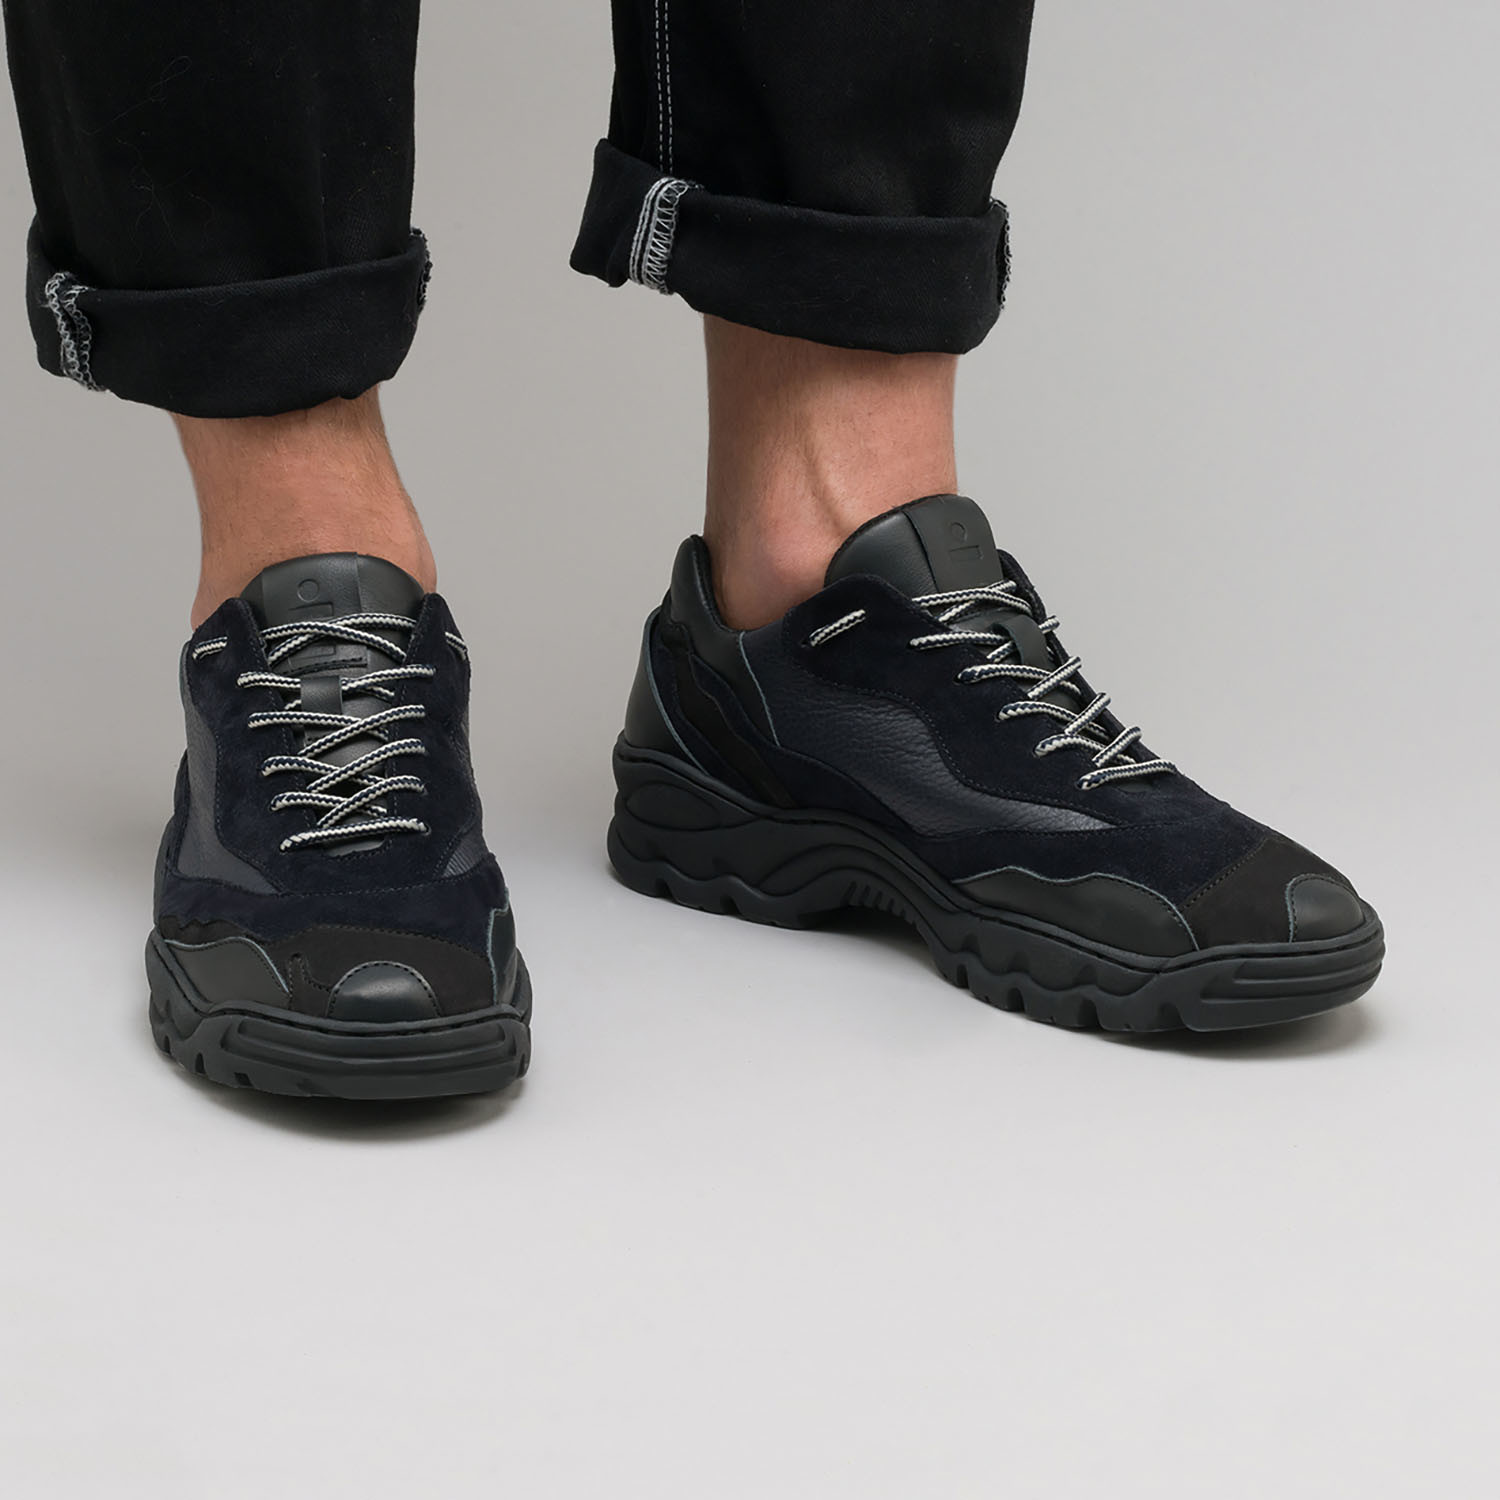 Landscape Sneakers V7 // Mix Black (Euro: 39) - DiVERGE - Touch of Modern